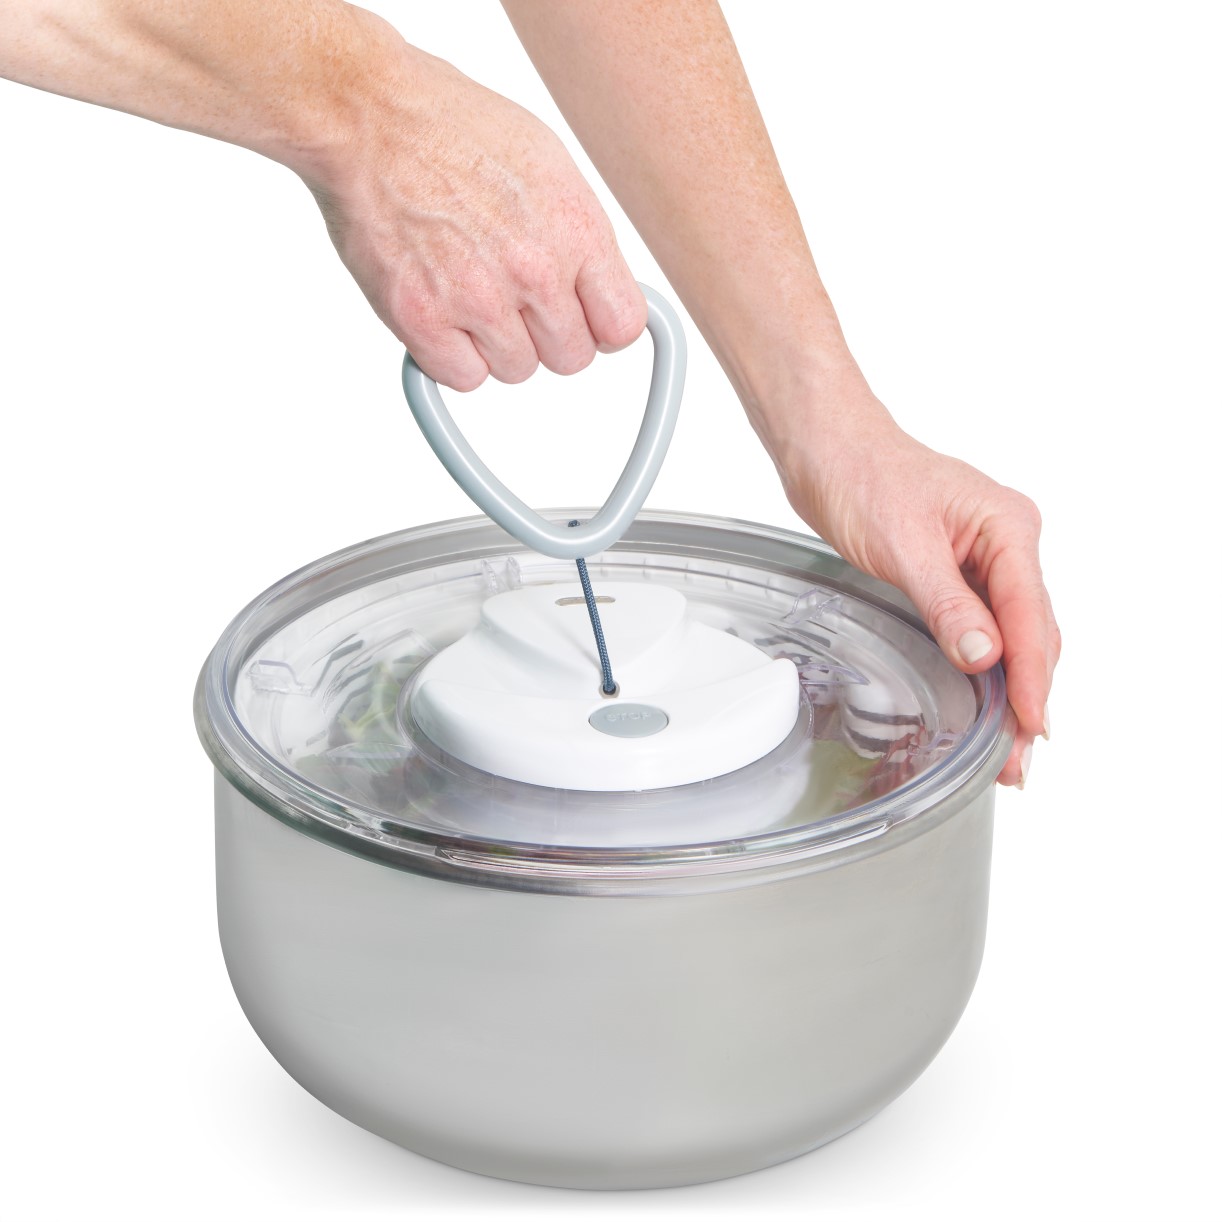 Zyliss Easy Spin 2 Stainless Steel Salad Spinner and Vegetable Washer with Silver Steel Serving Bowl 2.31 lb - image 2 of 6